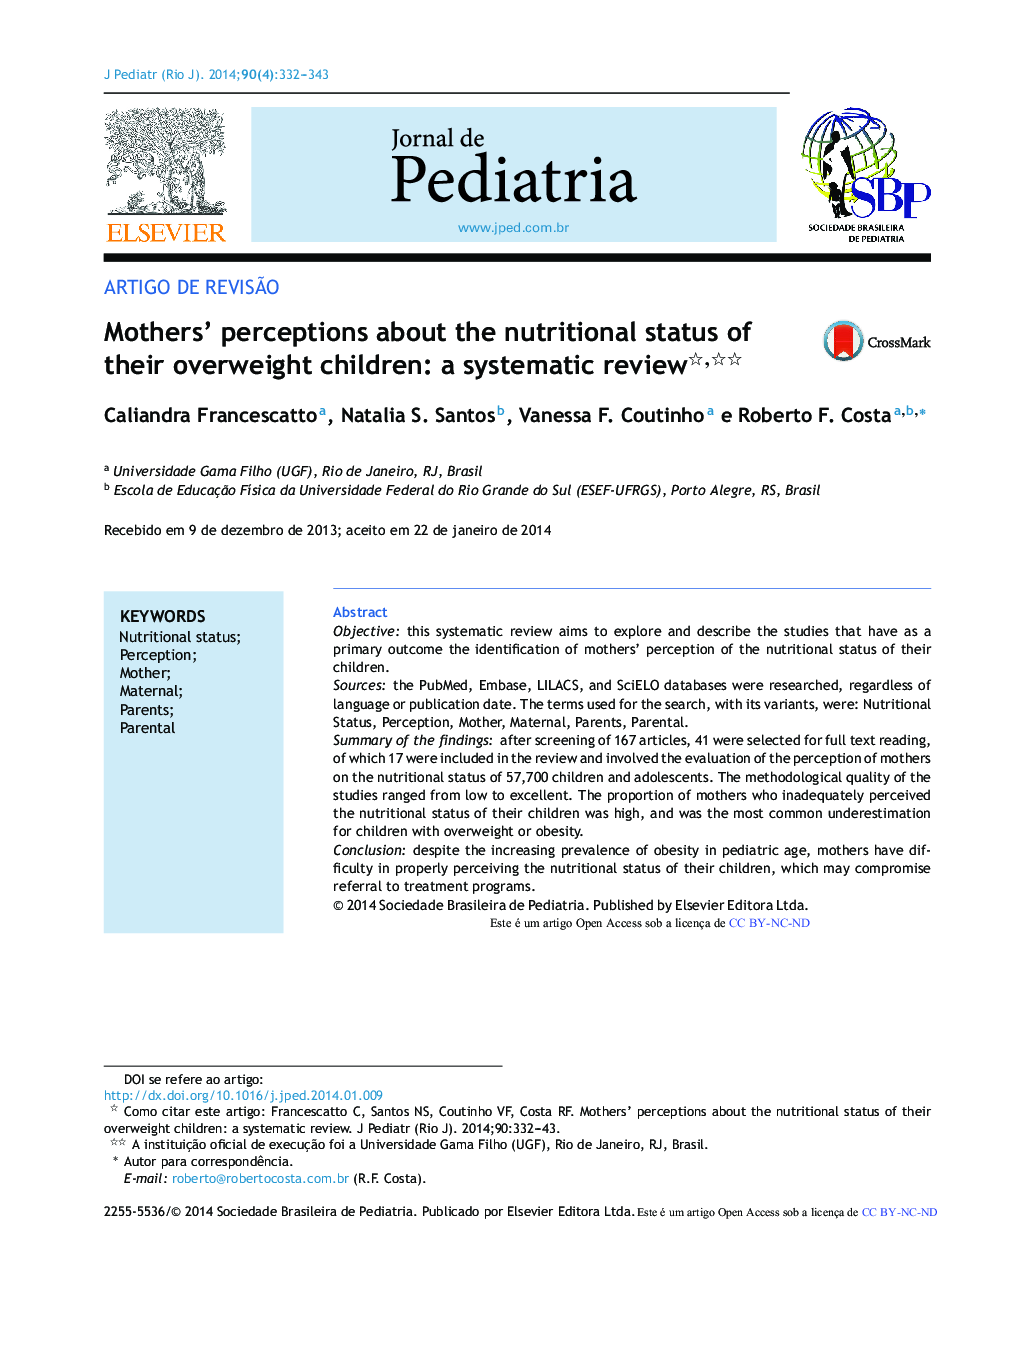 Mothers' perceptions about the nutritional status of their overweight children: a systematic review